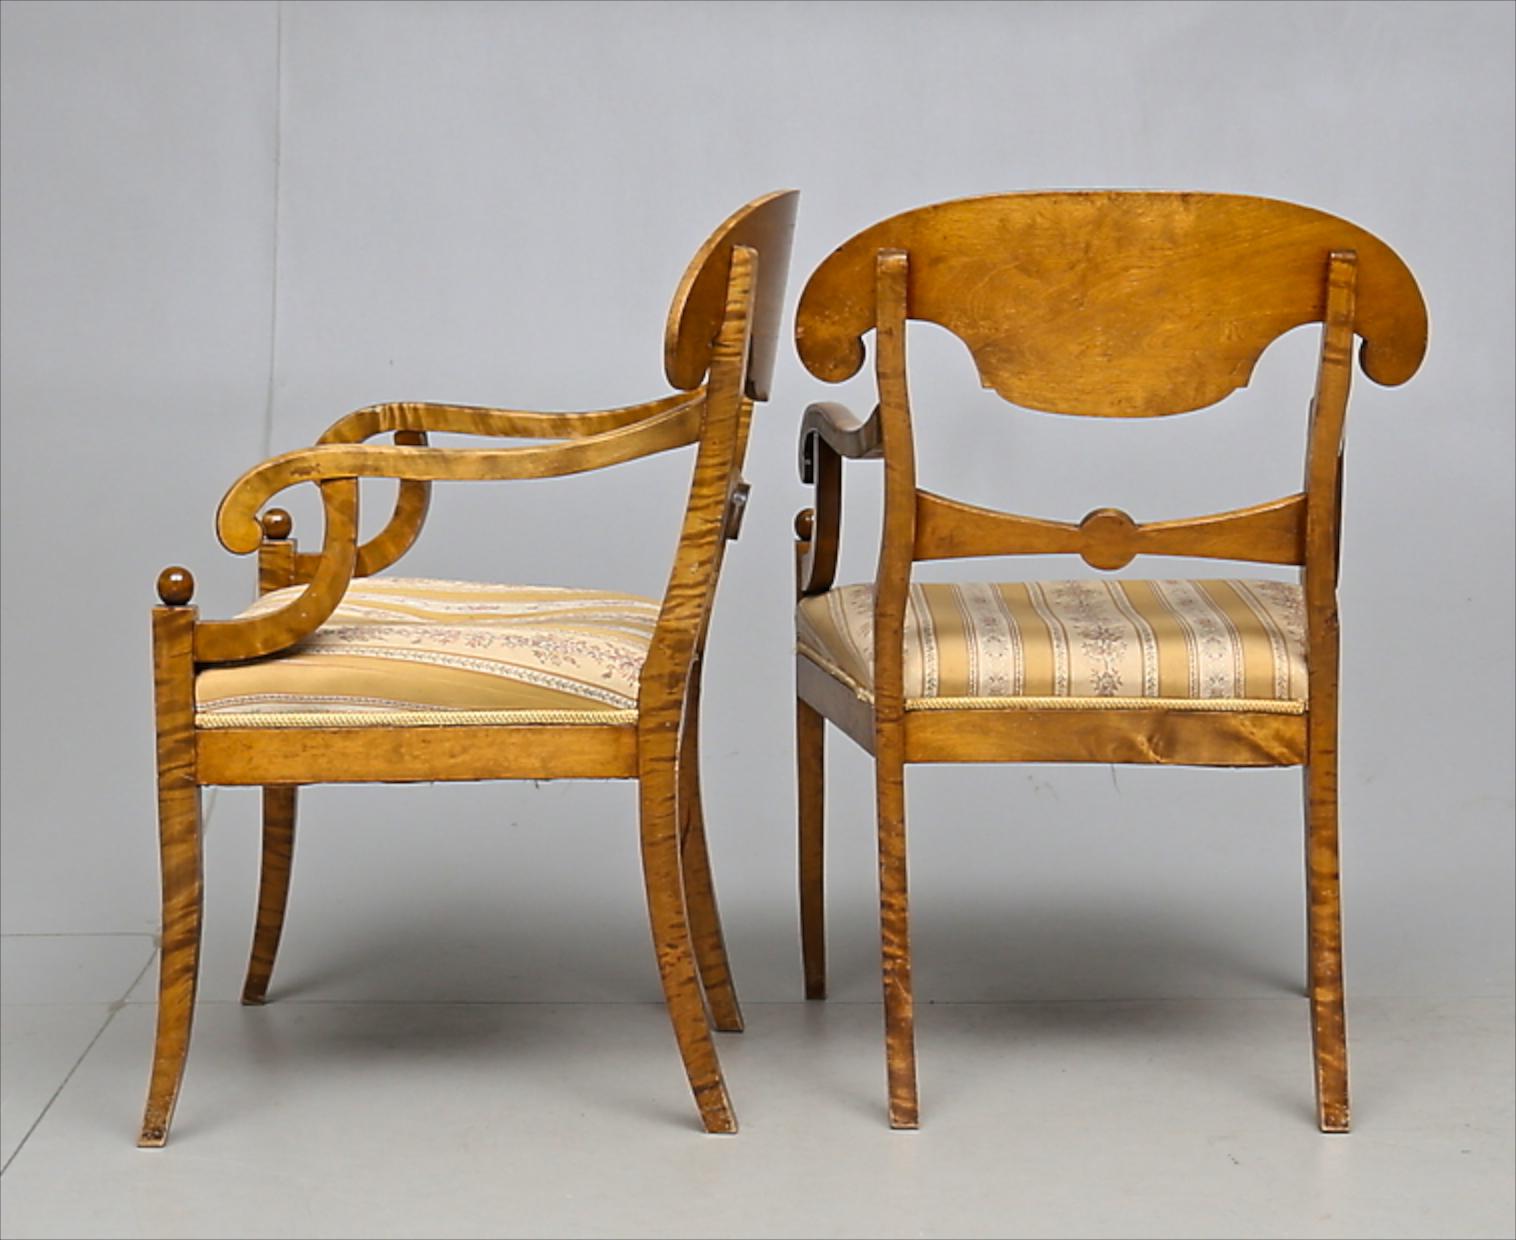 Carved Biedermeier Carver Chairs Late 1800s Swedish Antique Quilted Golden Birch